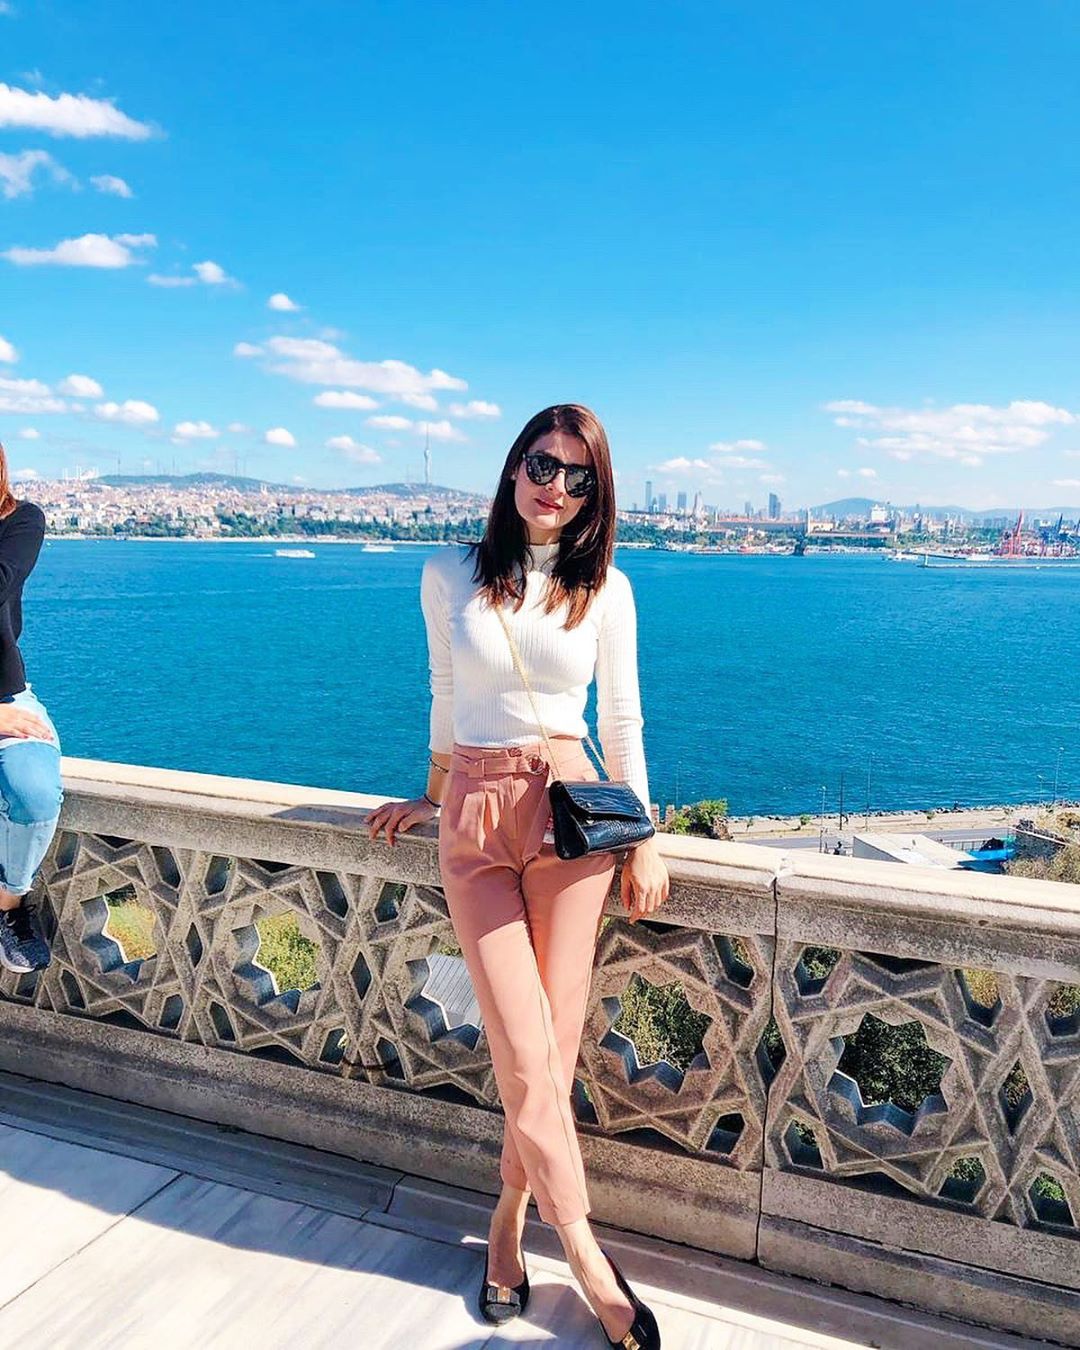 Actress Amna Malik's Latest Beautiful Pictures From Istanbul Turkey